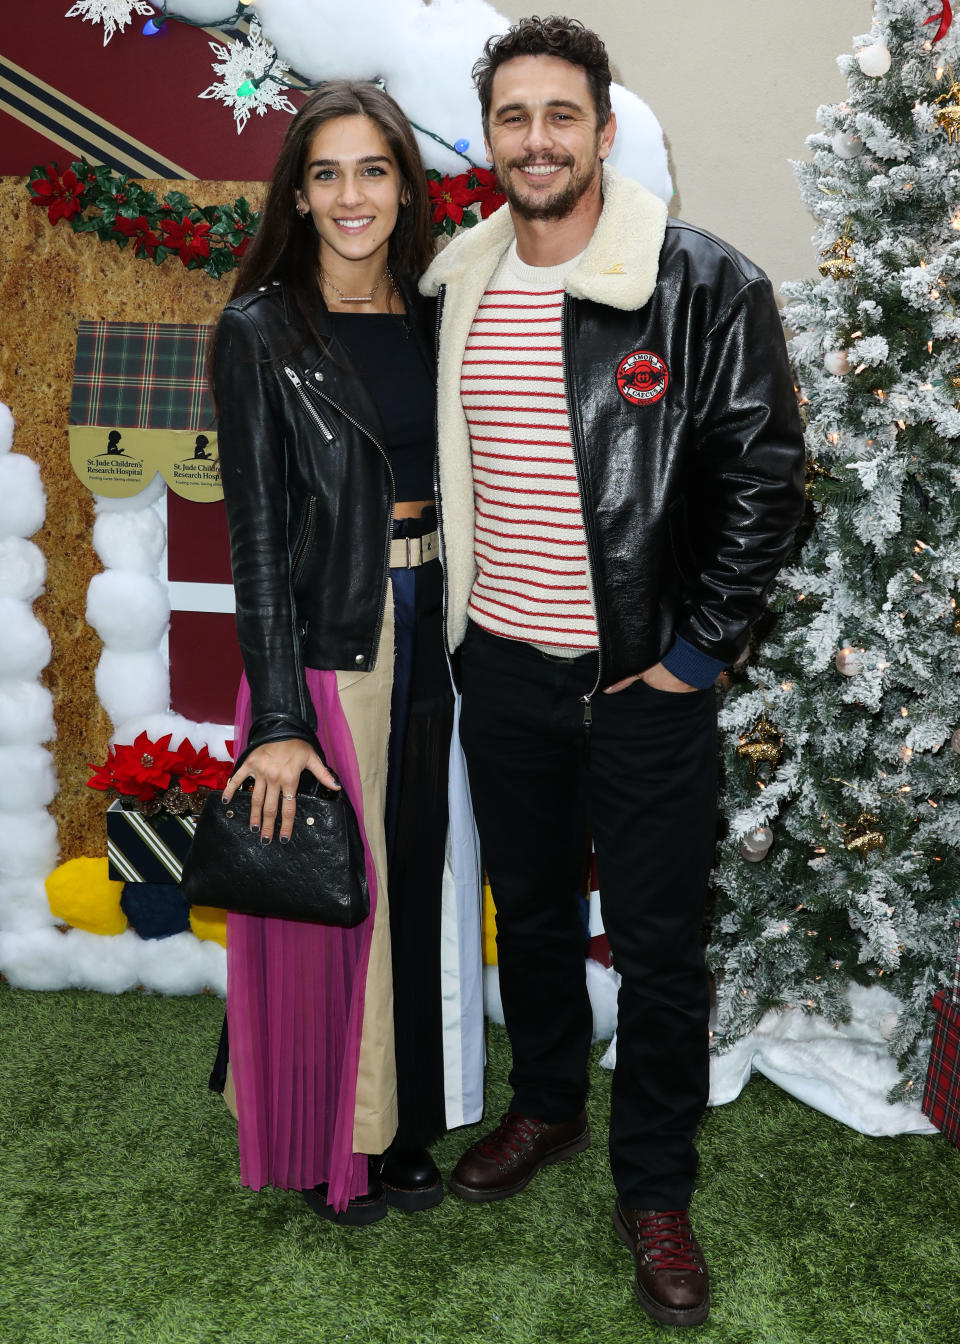 BEVERLY HILLS, LOS ANGELES, CA, USA - DECEMBER 09: Actress Isabel Pakzad and boyfriend/actor James Franco arrive at the Brooks Brothers Annual Holiday Celebration In Los Angeles To Benefit St. Jude 2018 held at the Beverly Wilshire Four Seasons Hotel on December 9, 2018 in Beverly Hills, Los Angeles, California, United States. (Photo by Xavier Collin/Image Press Agency/Sipa USA)